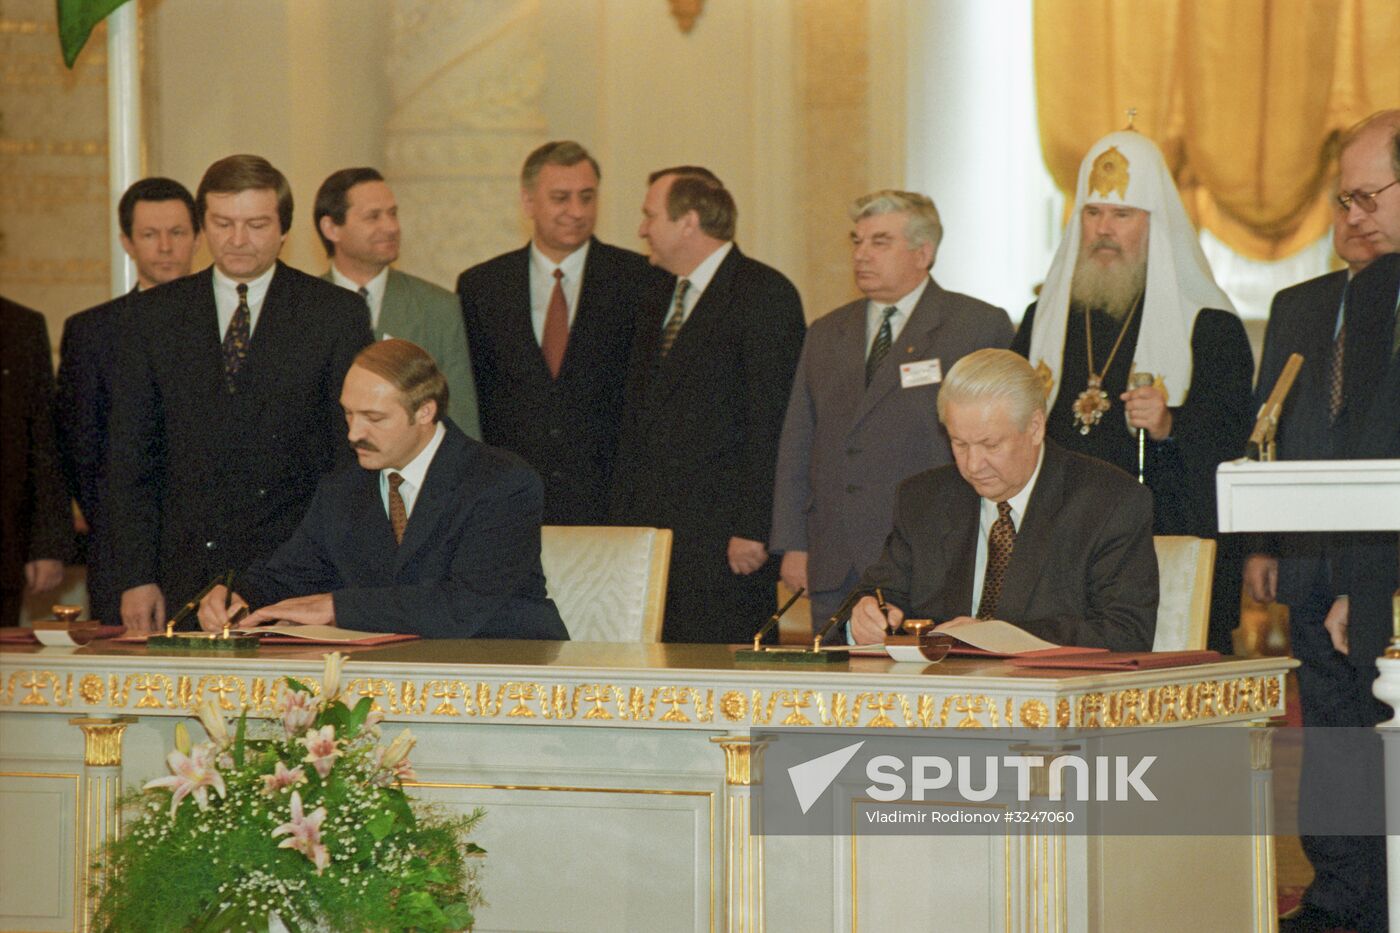 Signing the Agreement on the Formation of the Community of Russia and Belarus